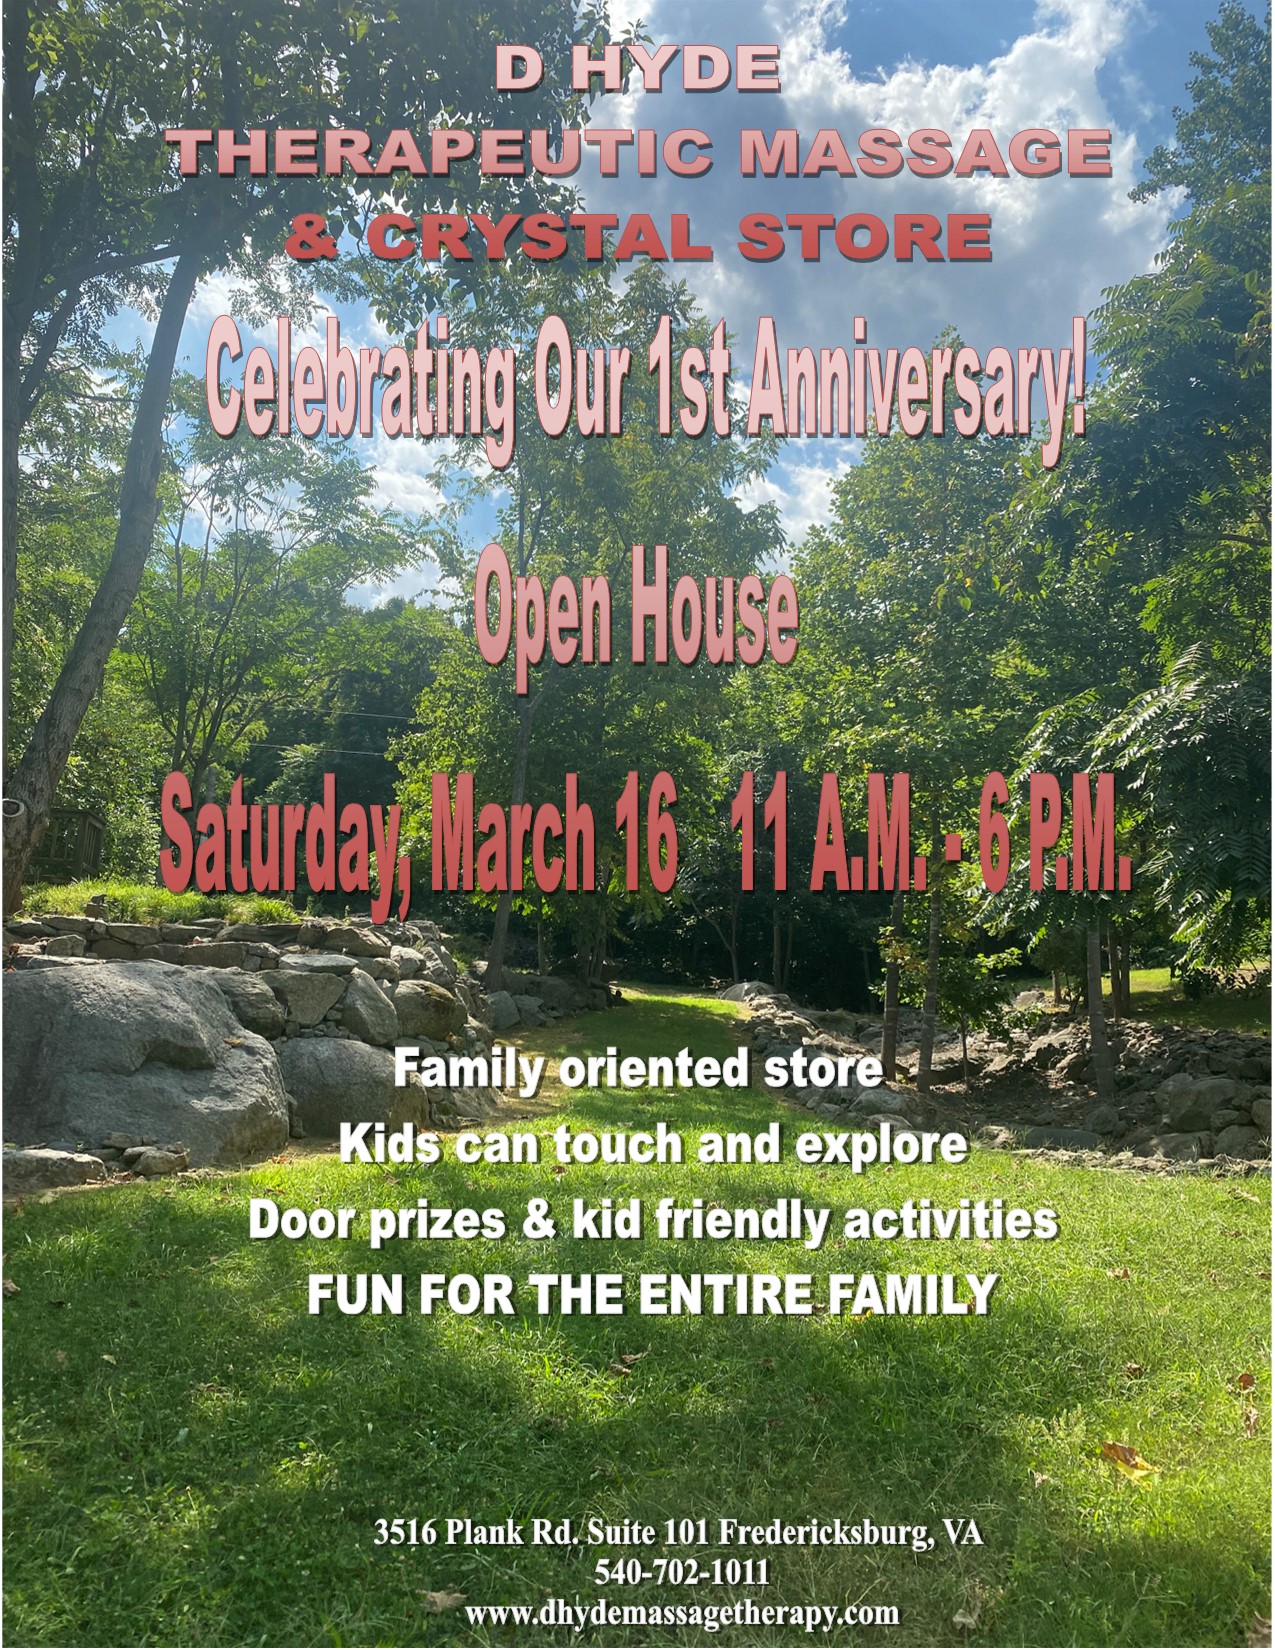 <h1 class="tribe-events-single-event-title">Anniversary Open House</h1>